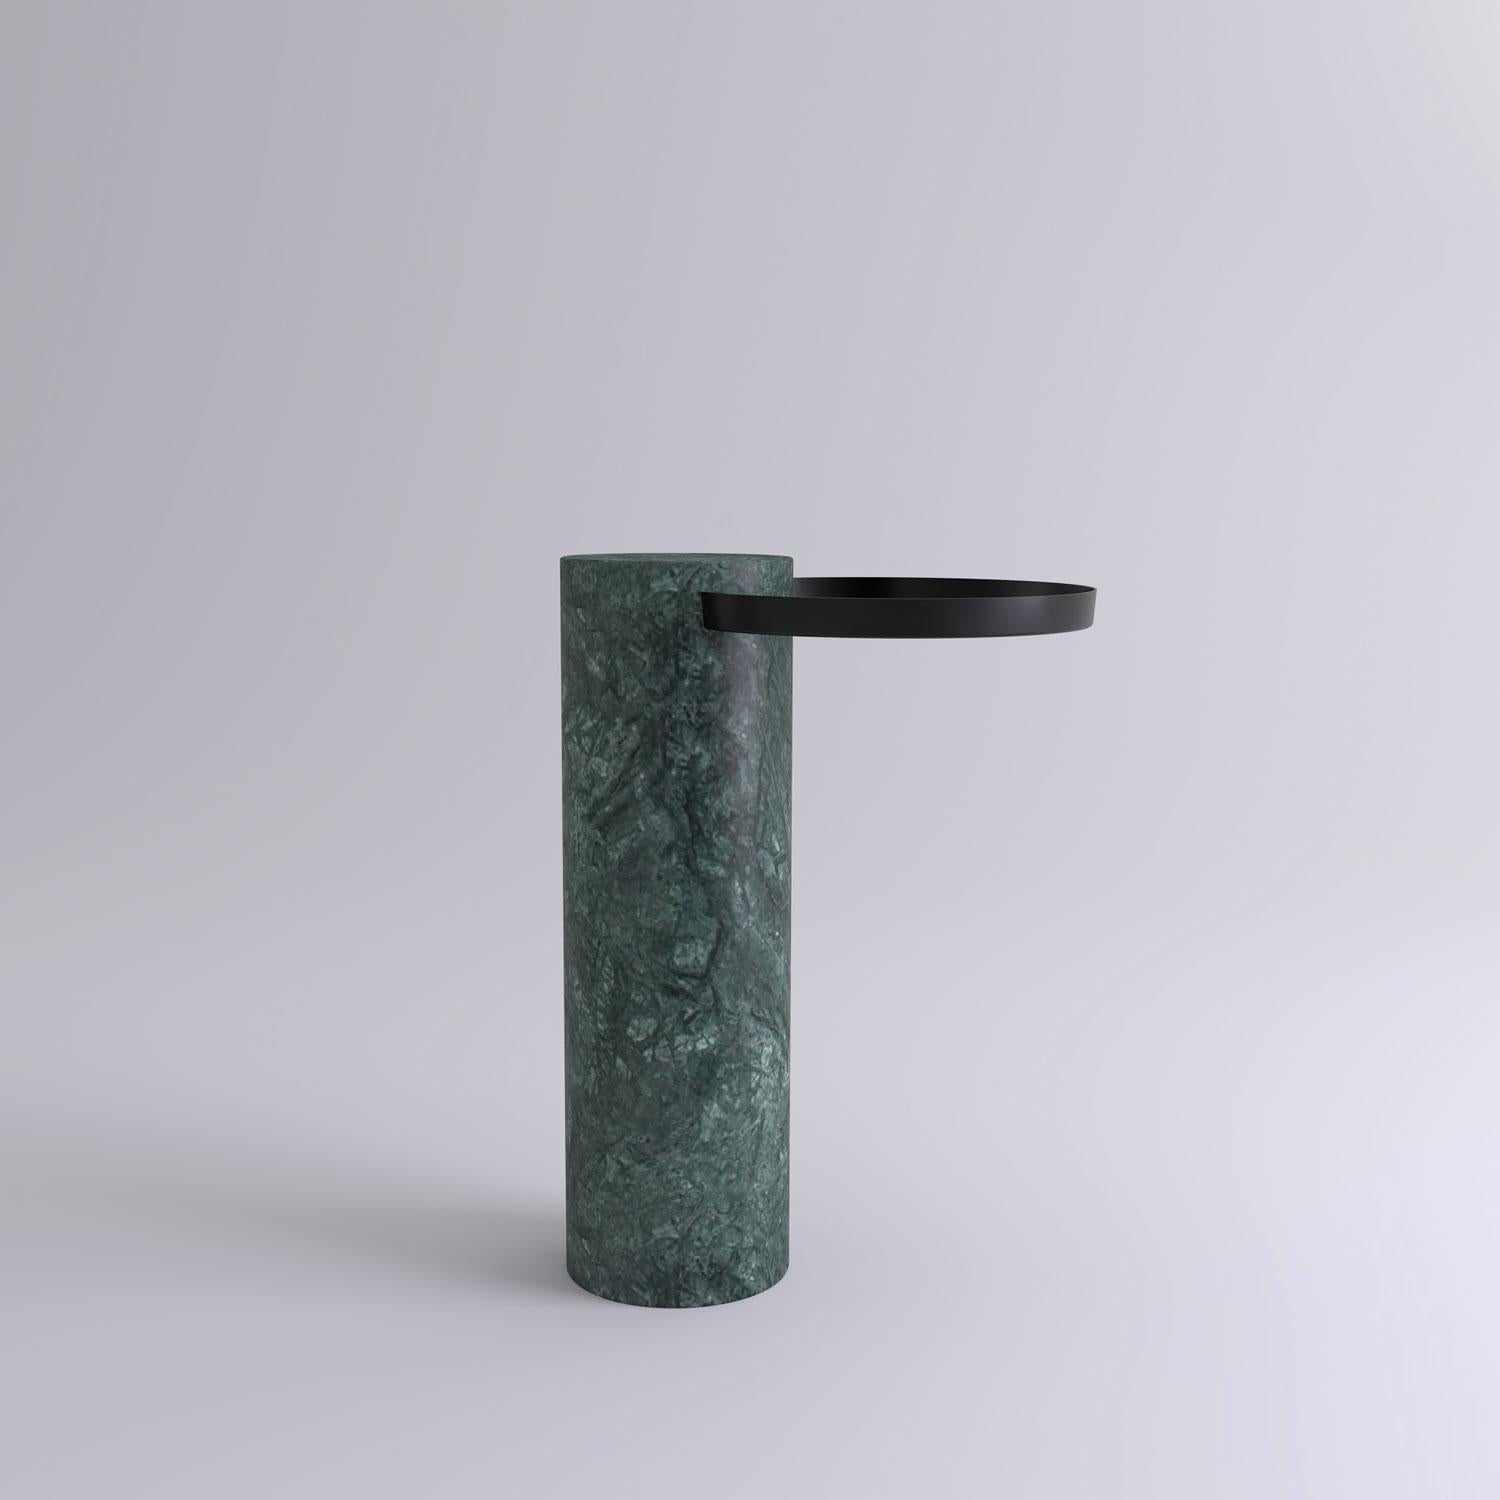 High indian green marble contemporary guéridon, Sebastian Herkner
Dimensions: D 42 x H 57 cm
Materials:  Indian Green marble, black metal tray

The salute table exists in 3 sizes, 4 different marble stones for the column and 5 different finishes for